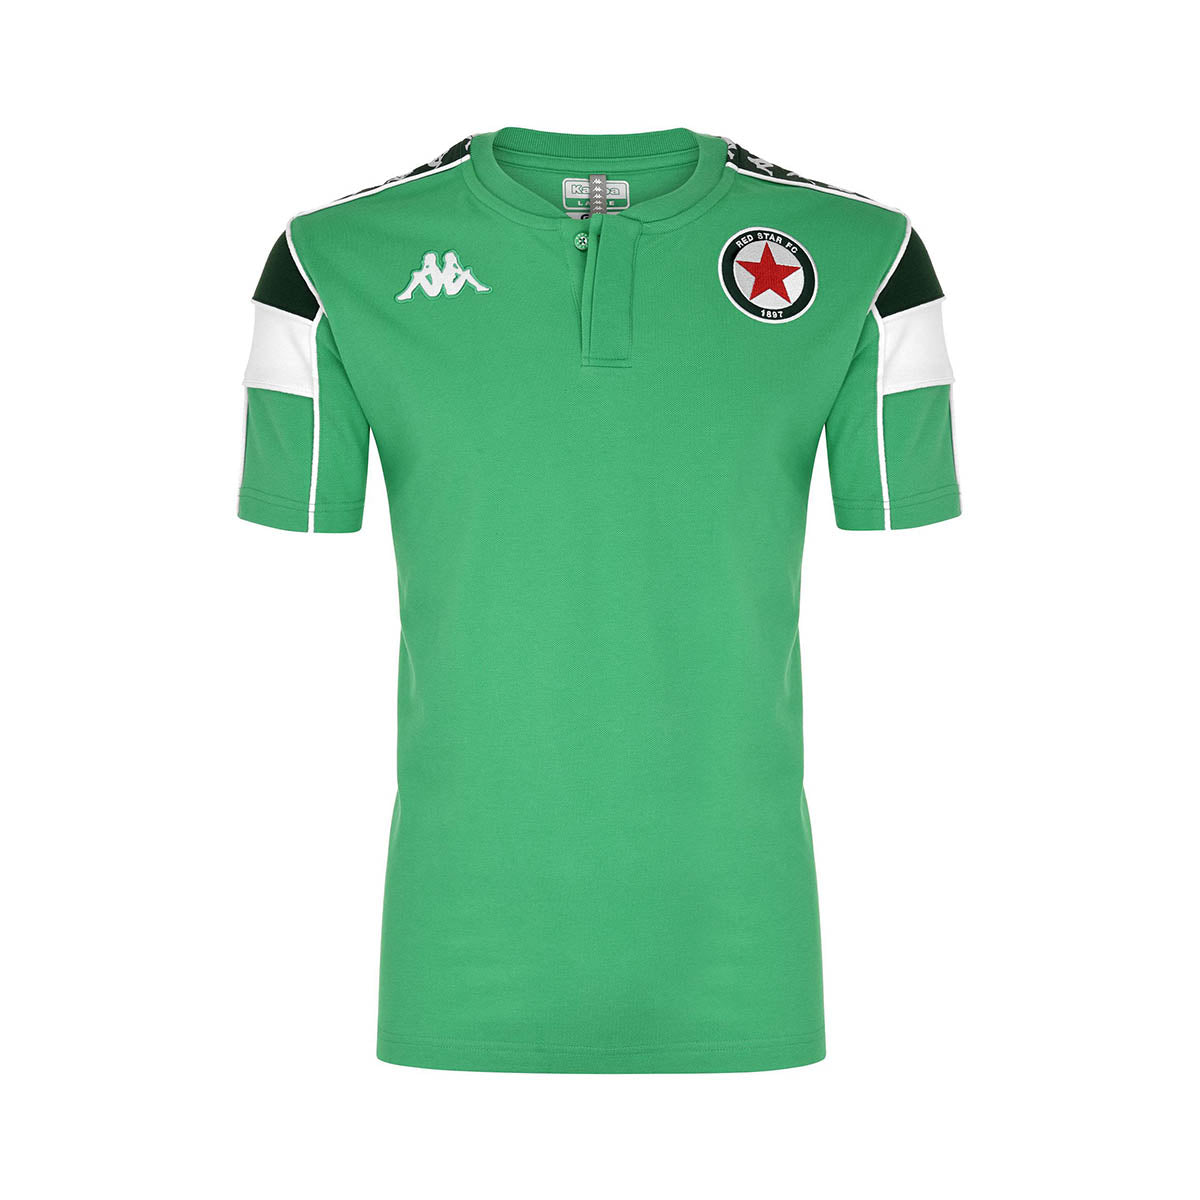 Polo Ararisi Red Star FC Vert homme - image 1